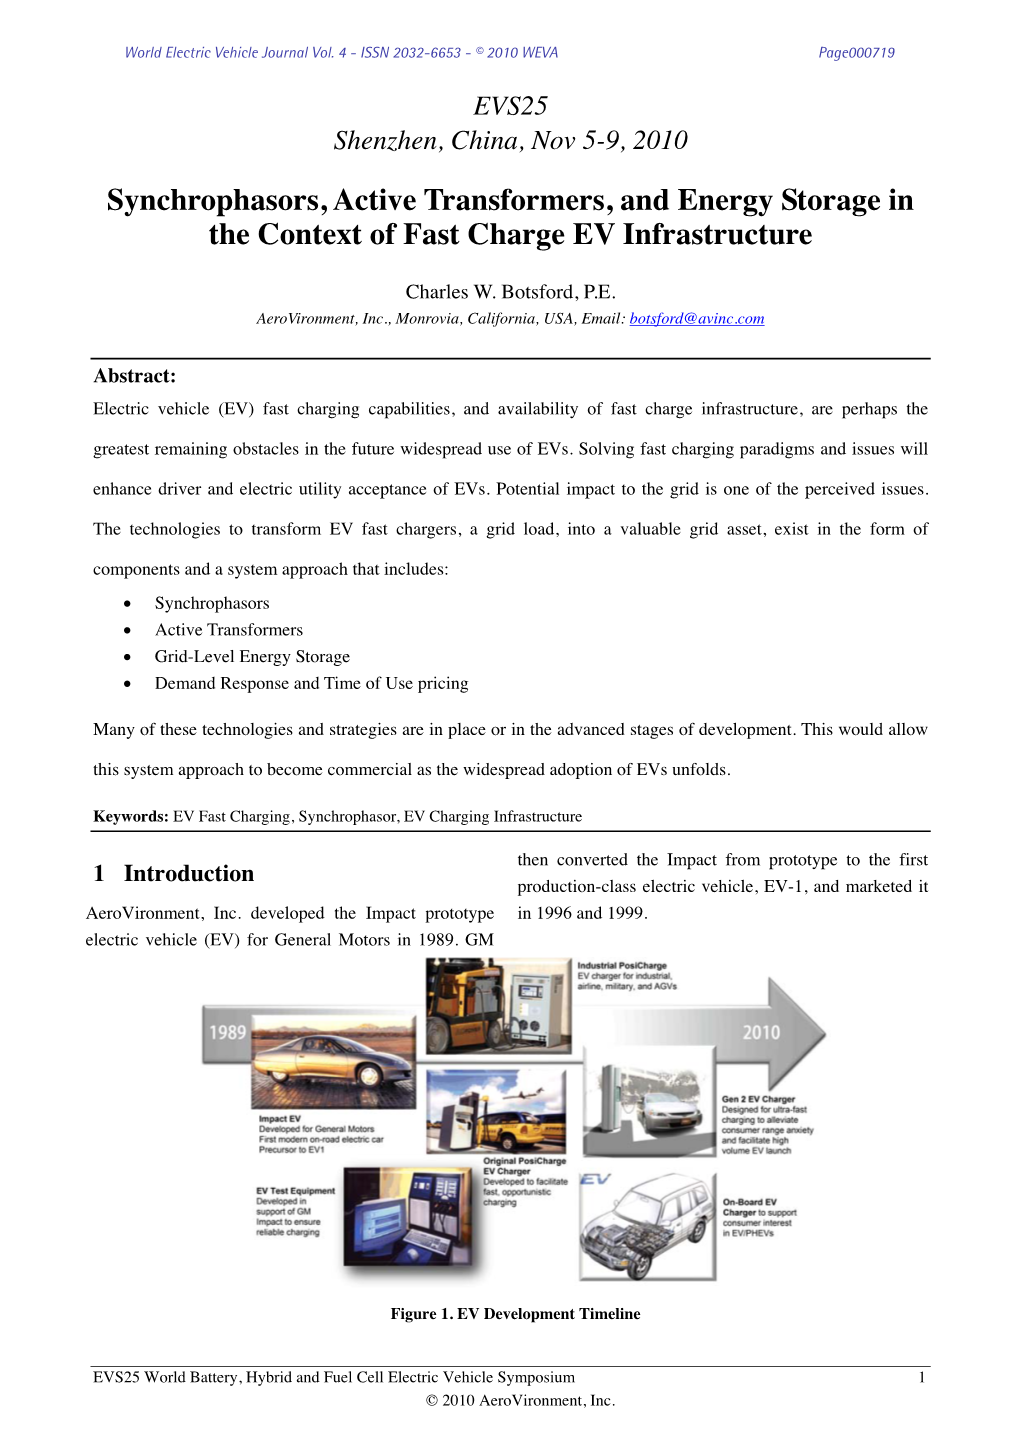 Synchrophasors, Active Transformers, and Energy Storage in the Context of Fast Charge EV Infrastructure